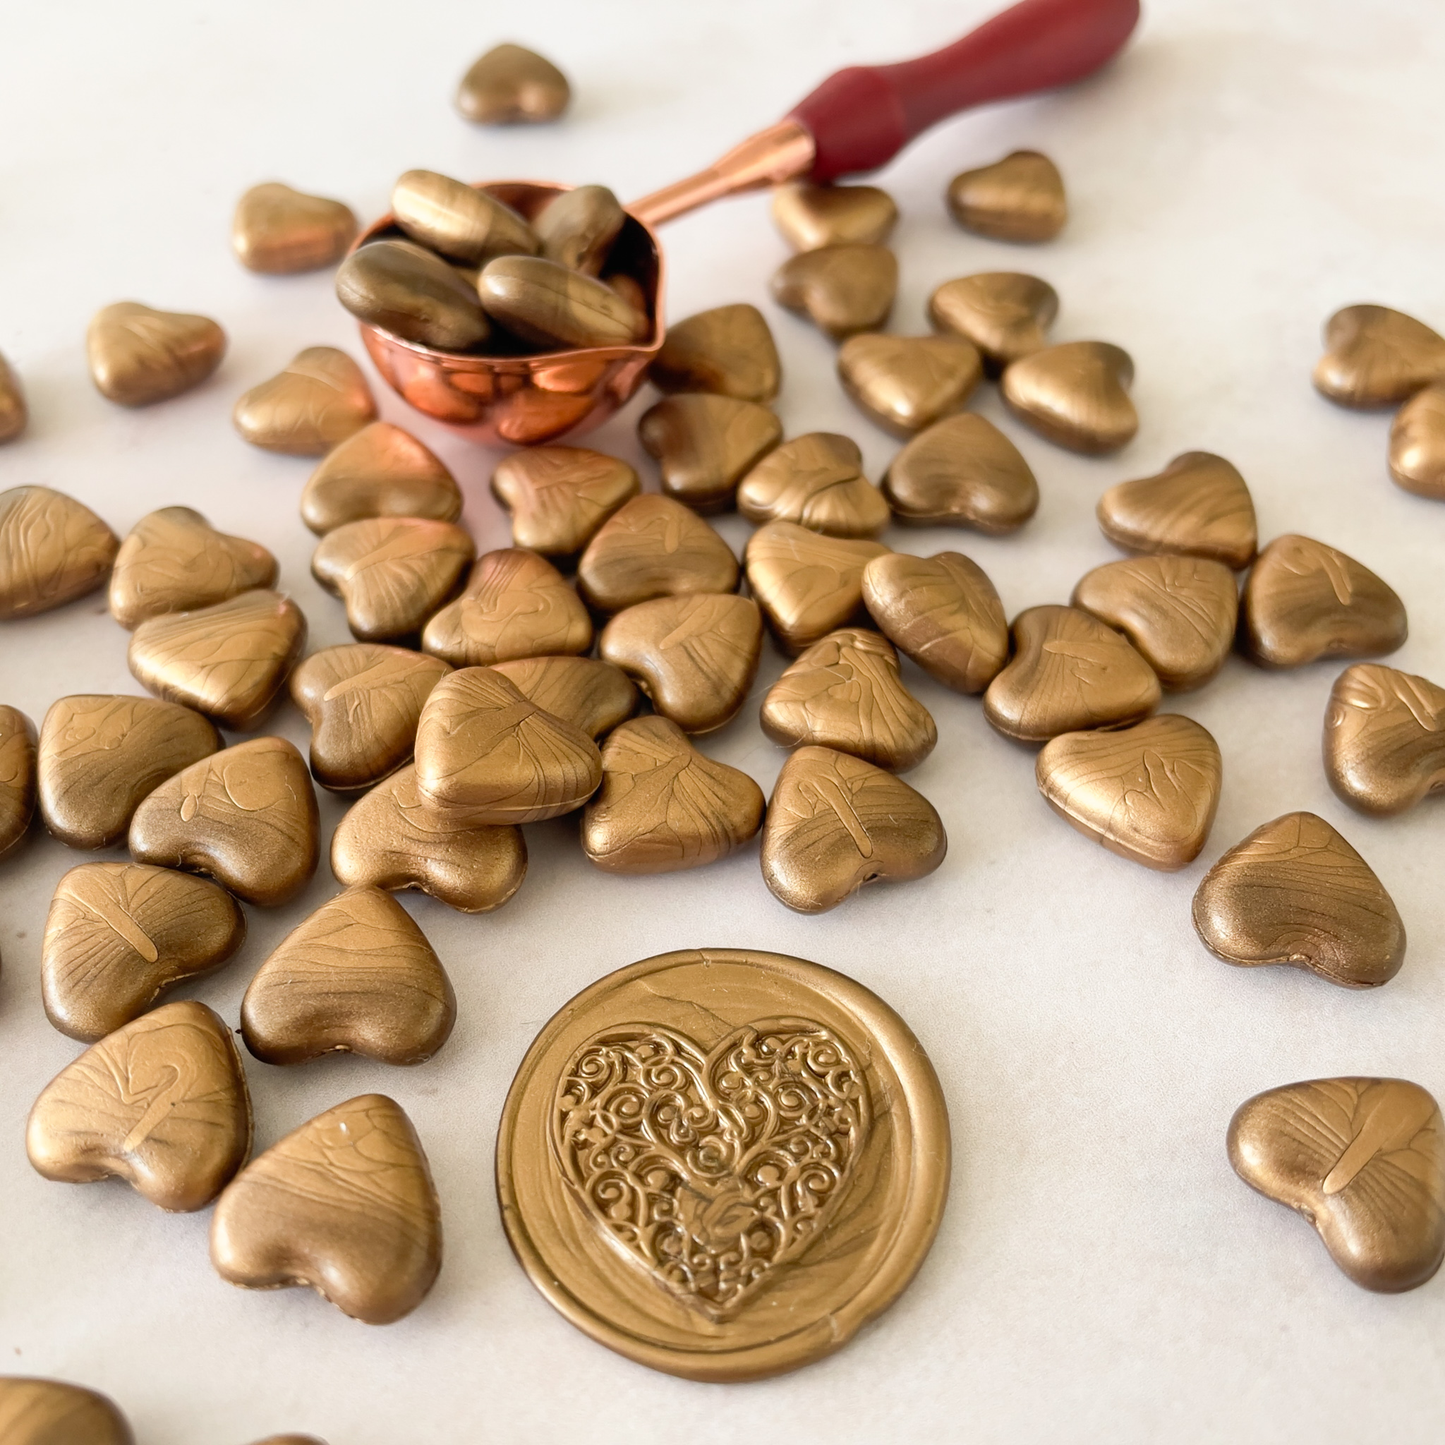 sealing wax beads in metallic gold colour.  Heart shaped wax beads for making wax seals and stamps.  